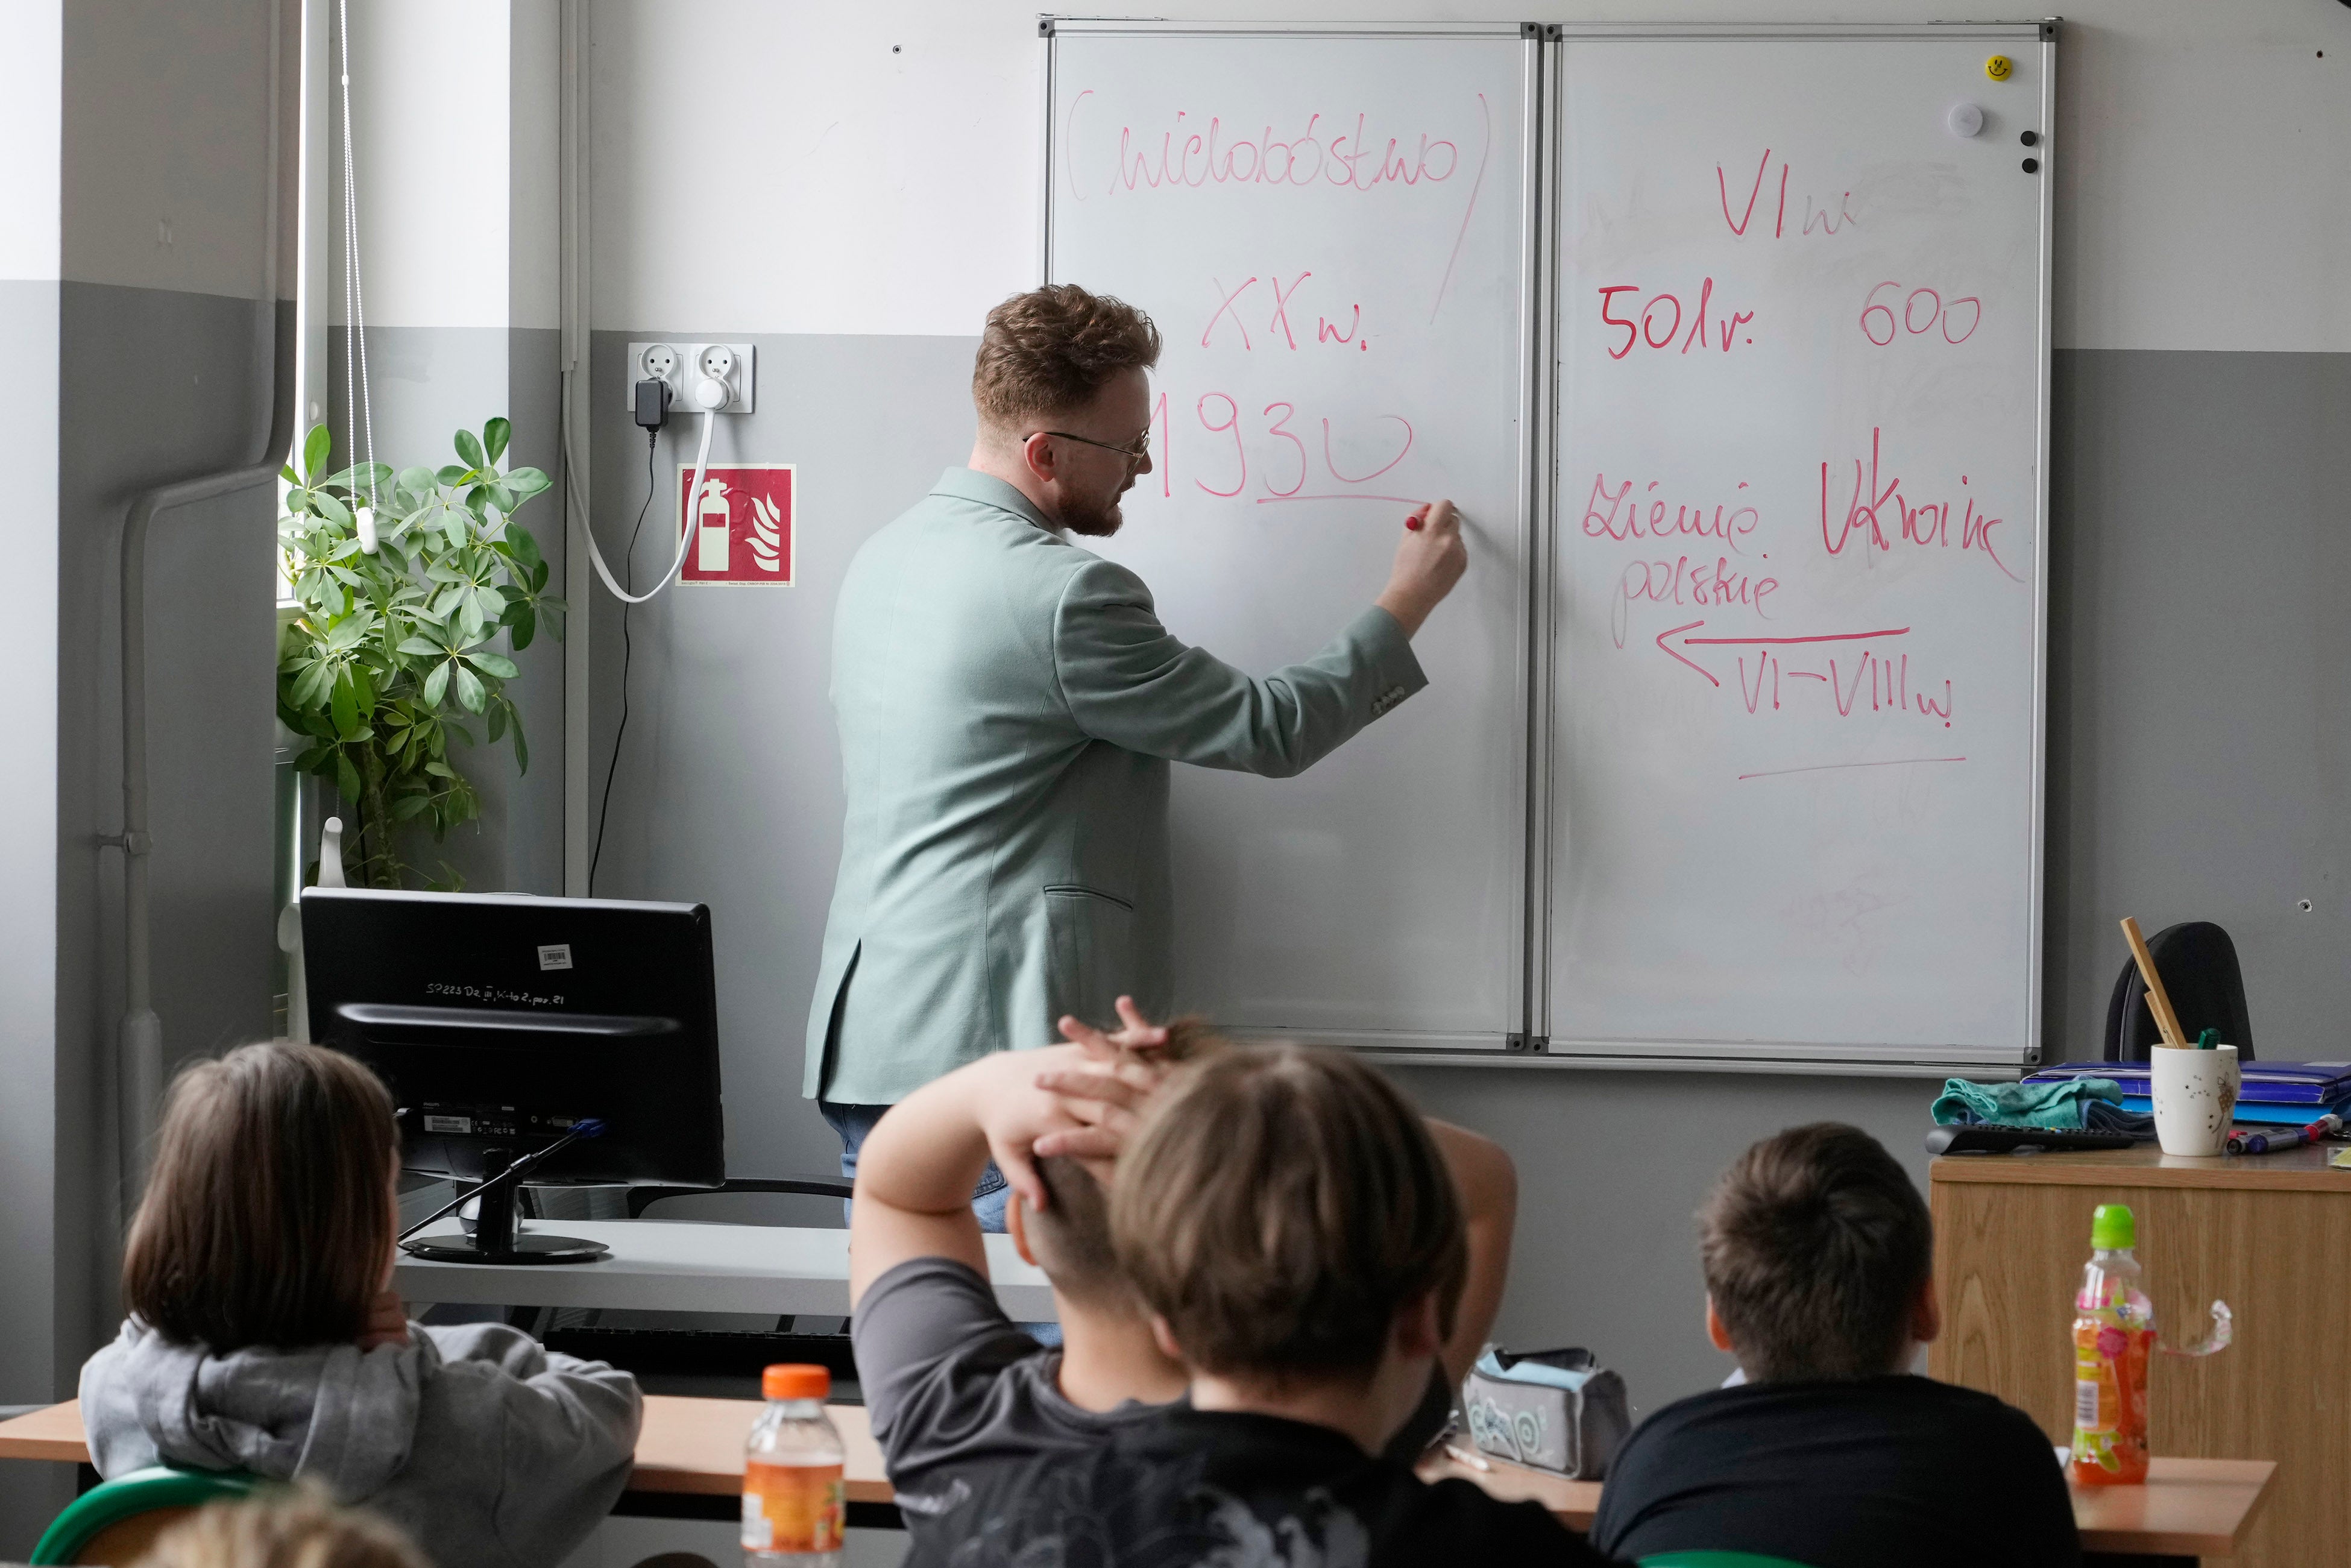 Arkadiusz Korporowicz teaches history to 5th grade children at Primary School number 223 in Warsaw, Poland